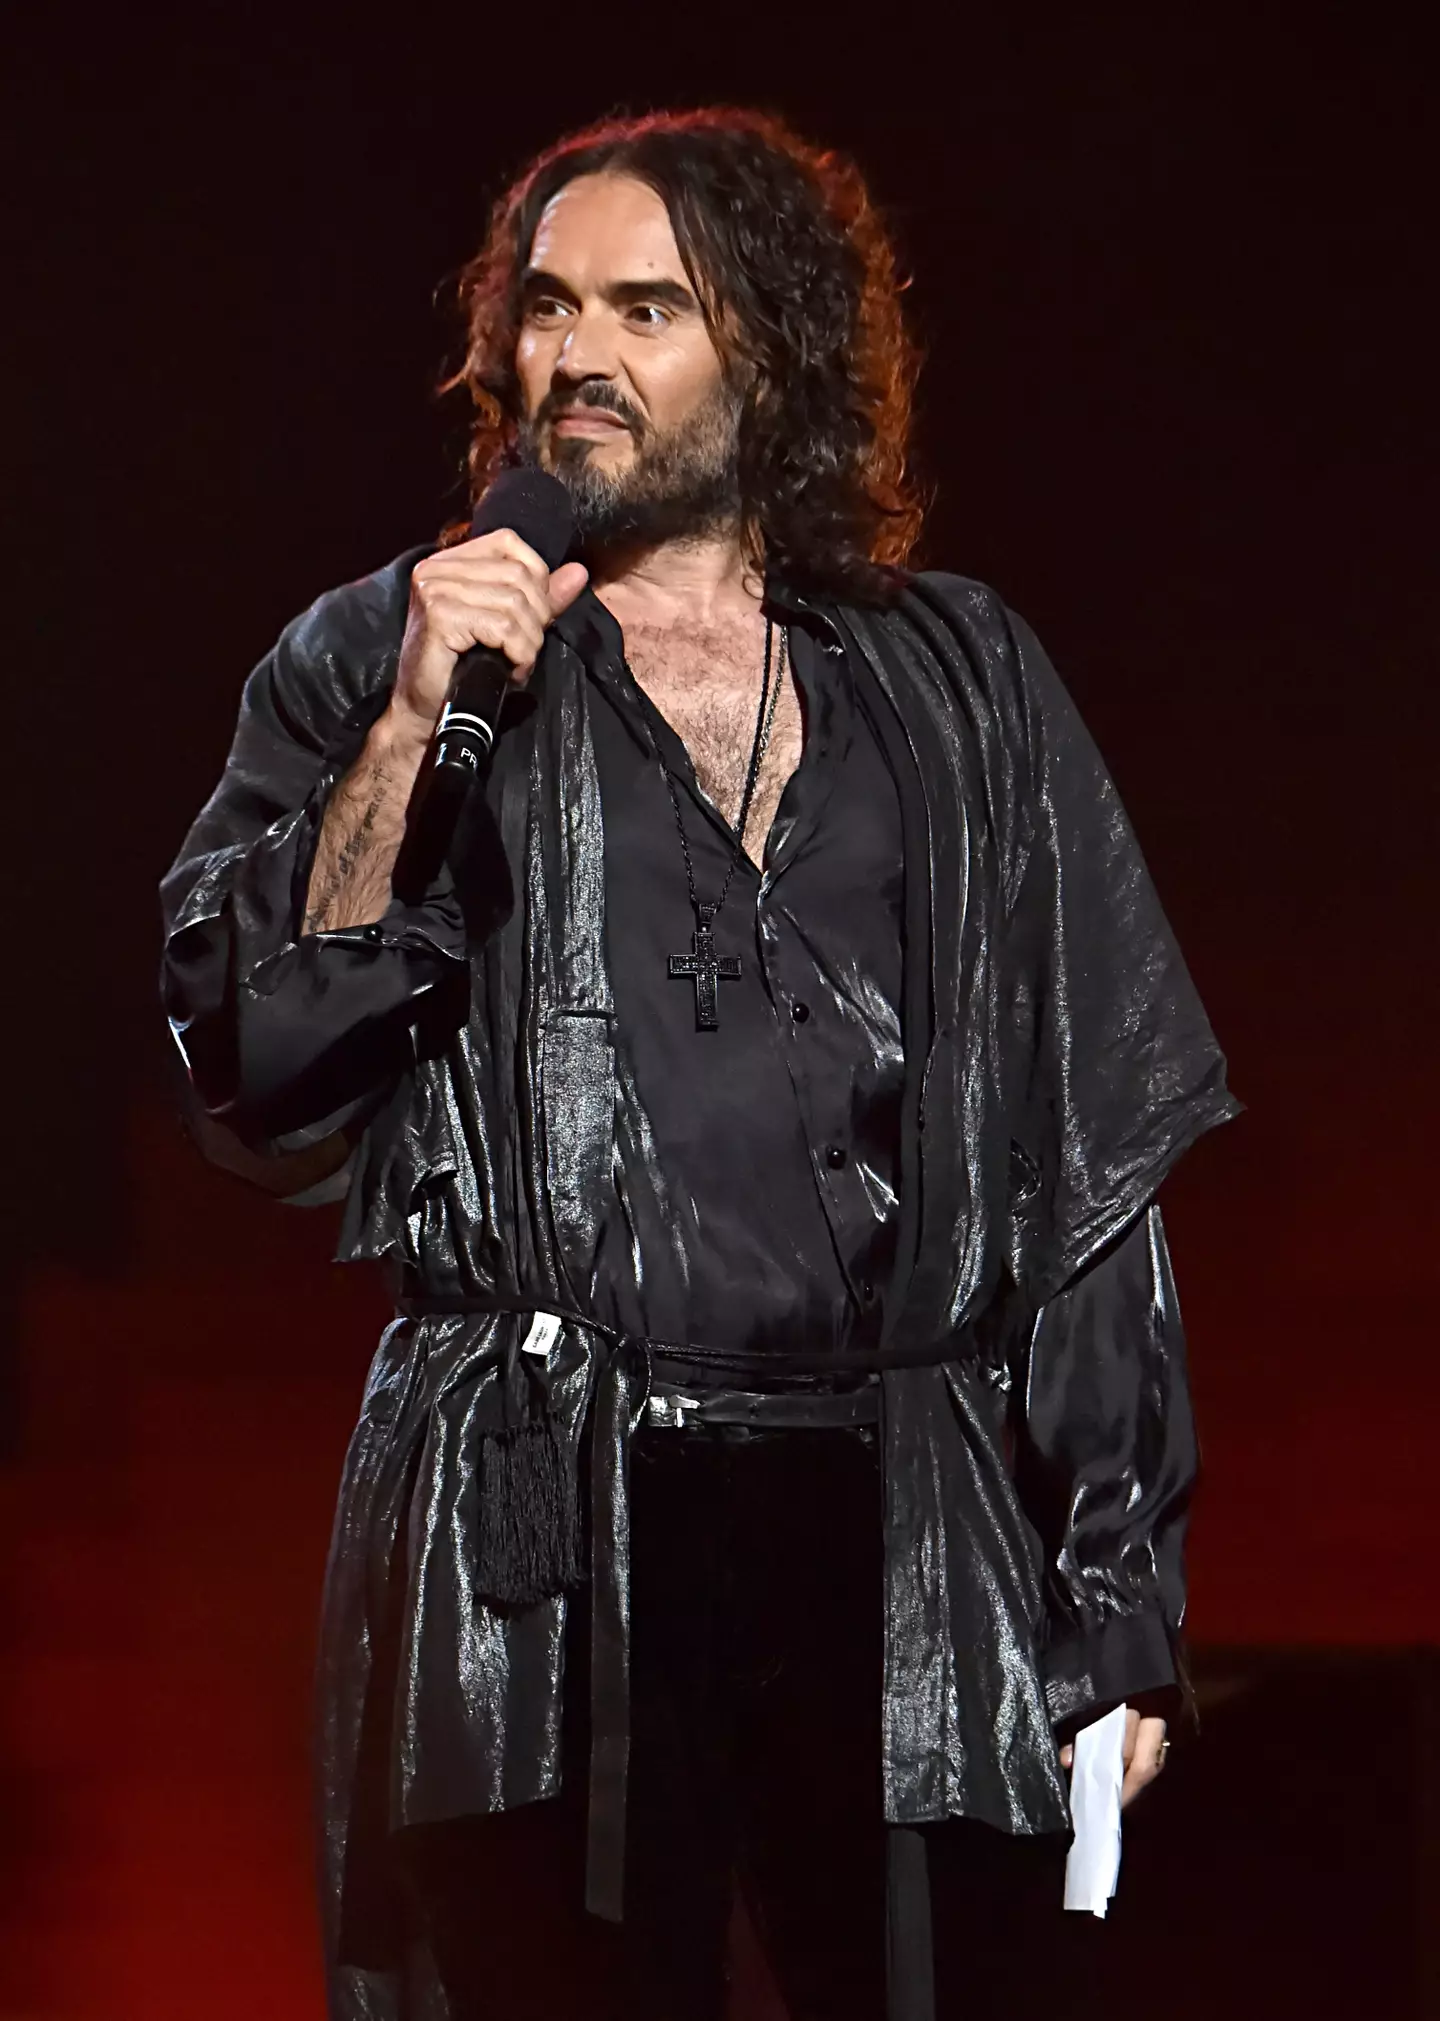 Russell Brand is facing allegations of rape by a handful of women.